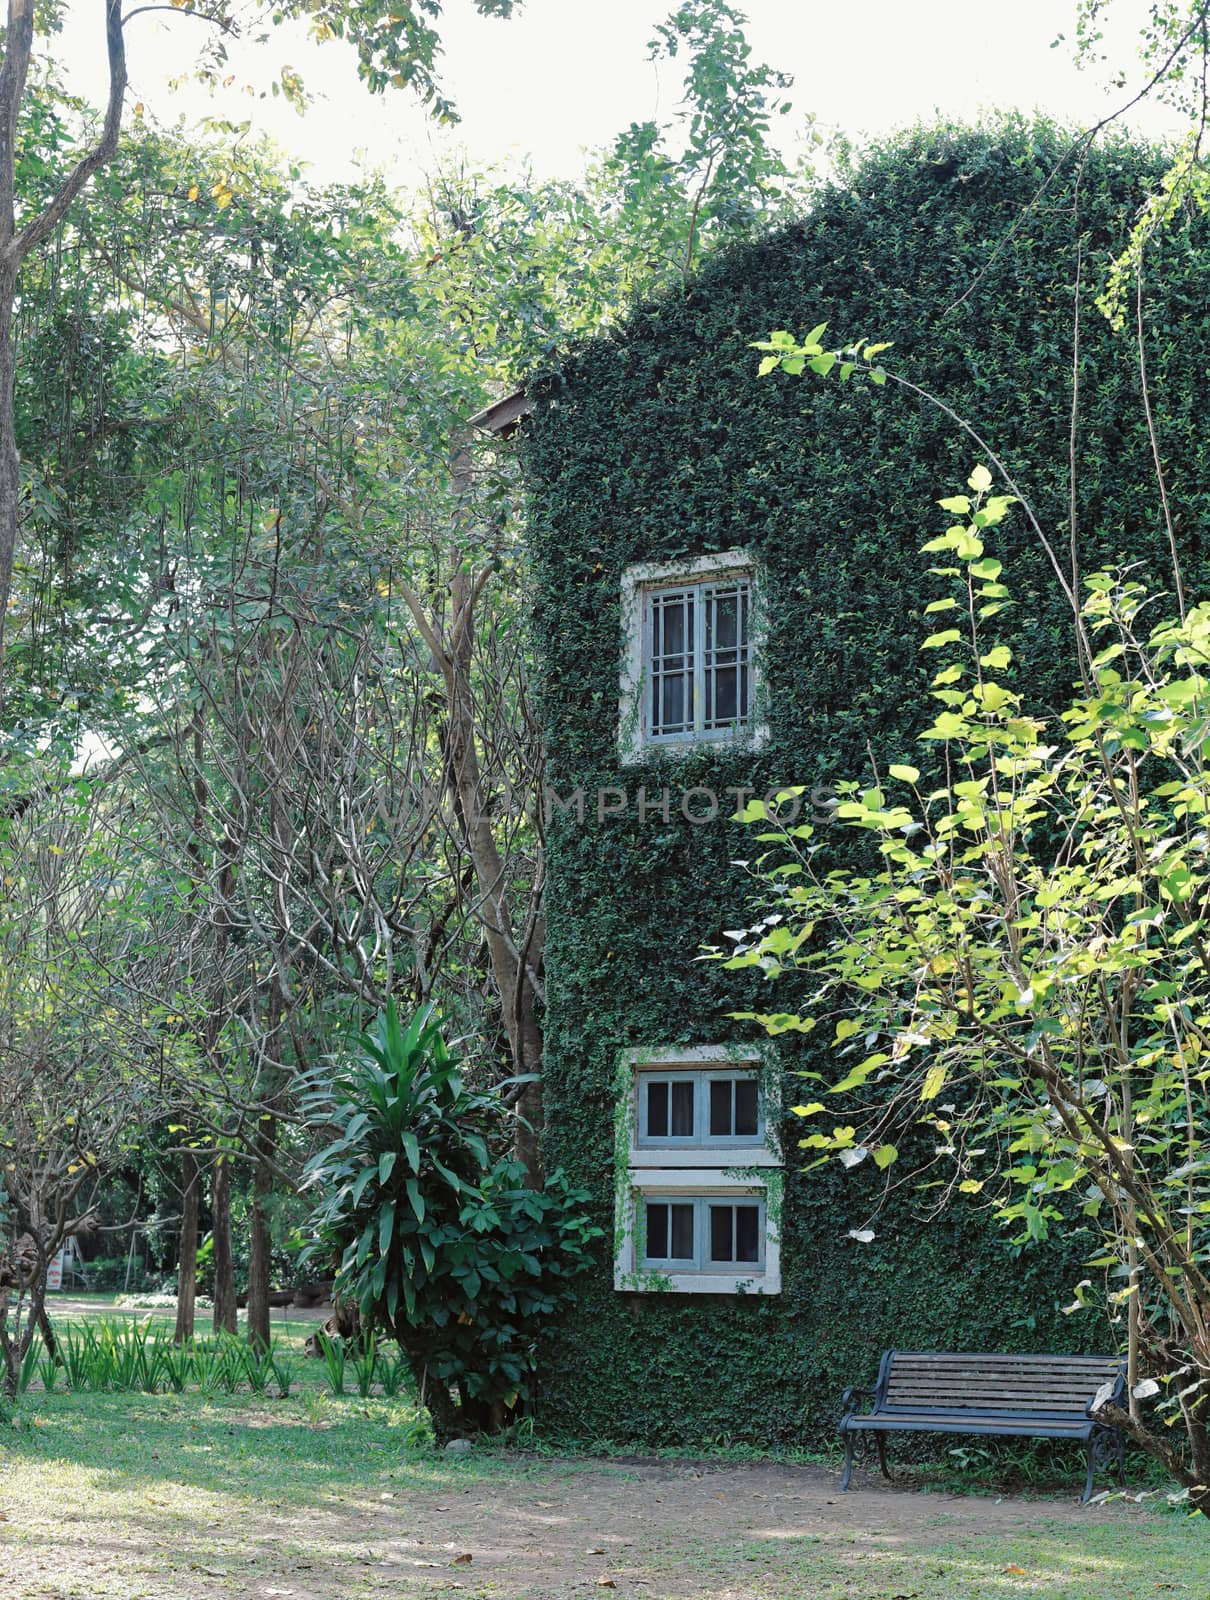 Old building house covered with green ivy plant, spring and natu by nuchylee